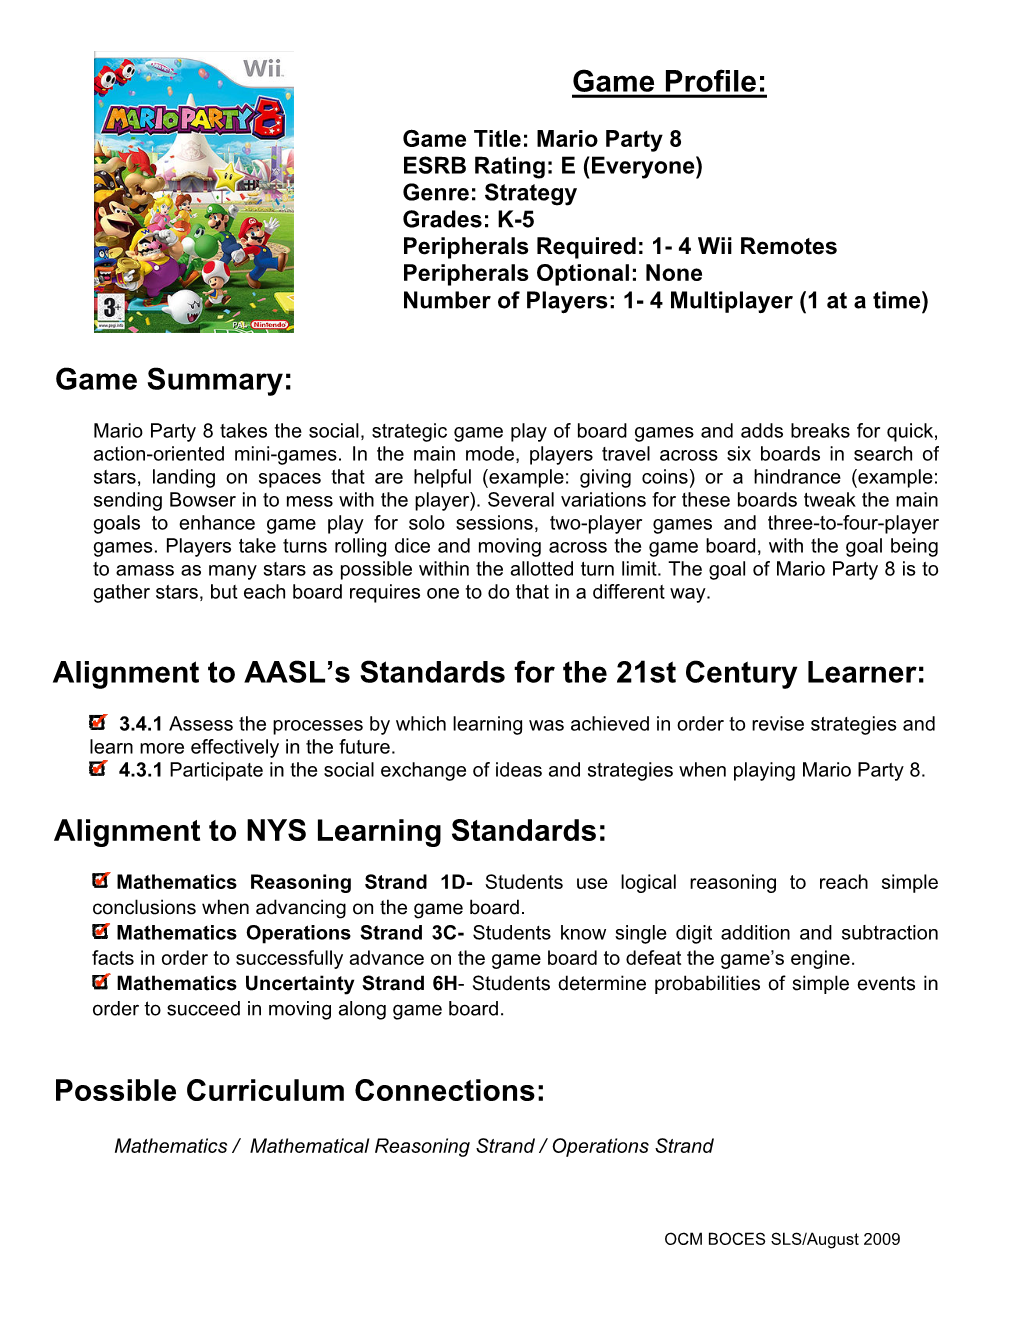 Alignment to AASL's Standards for the 21St Century Learner